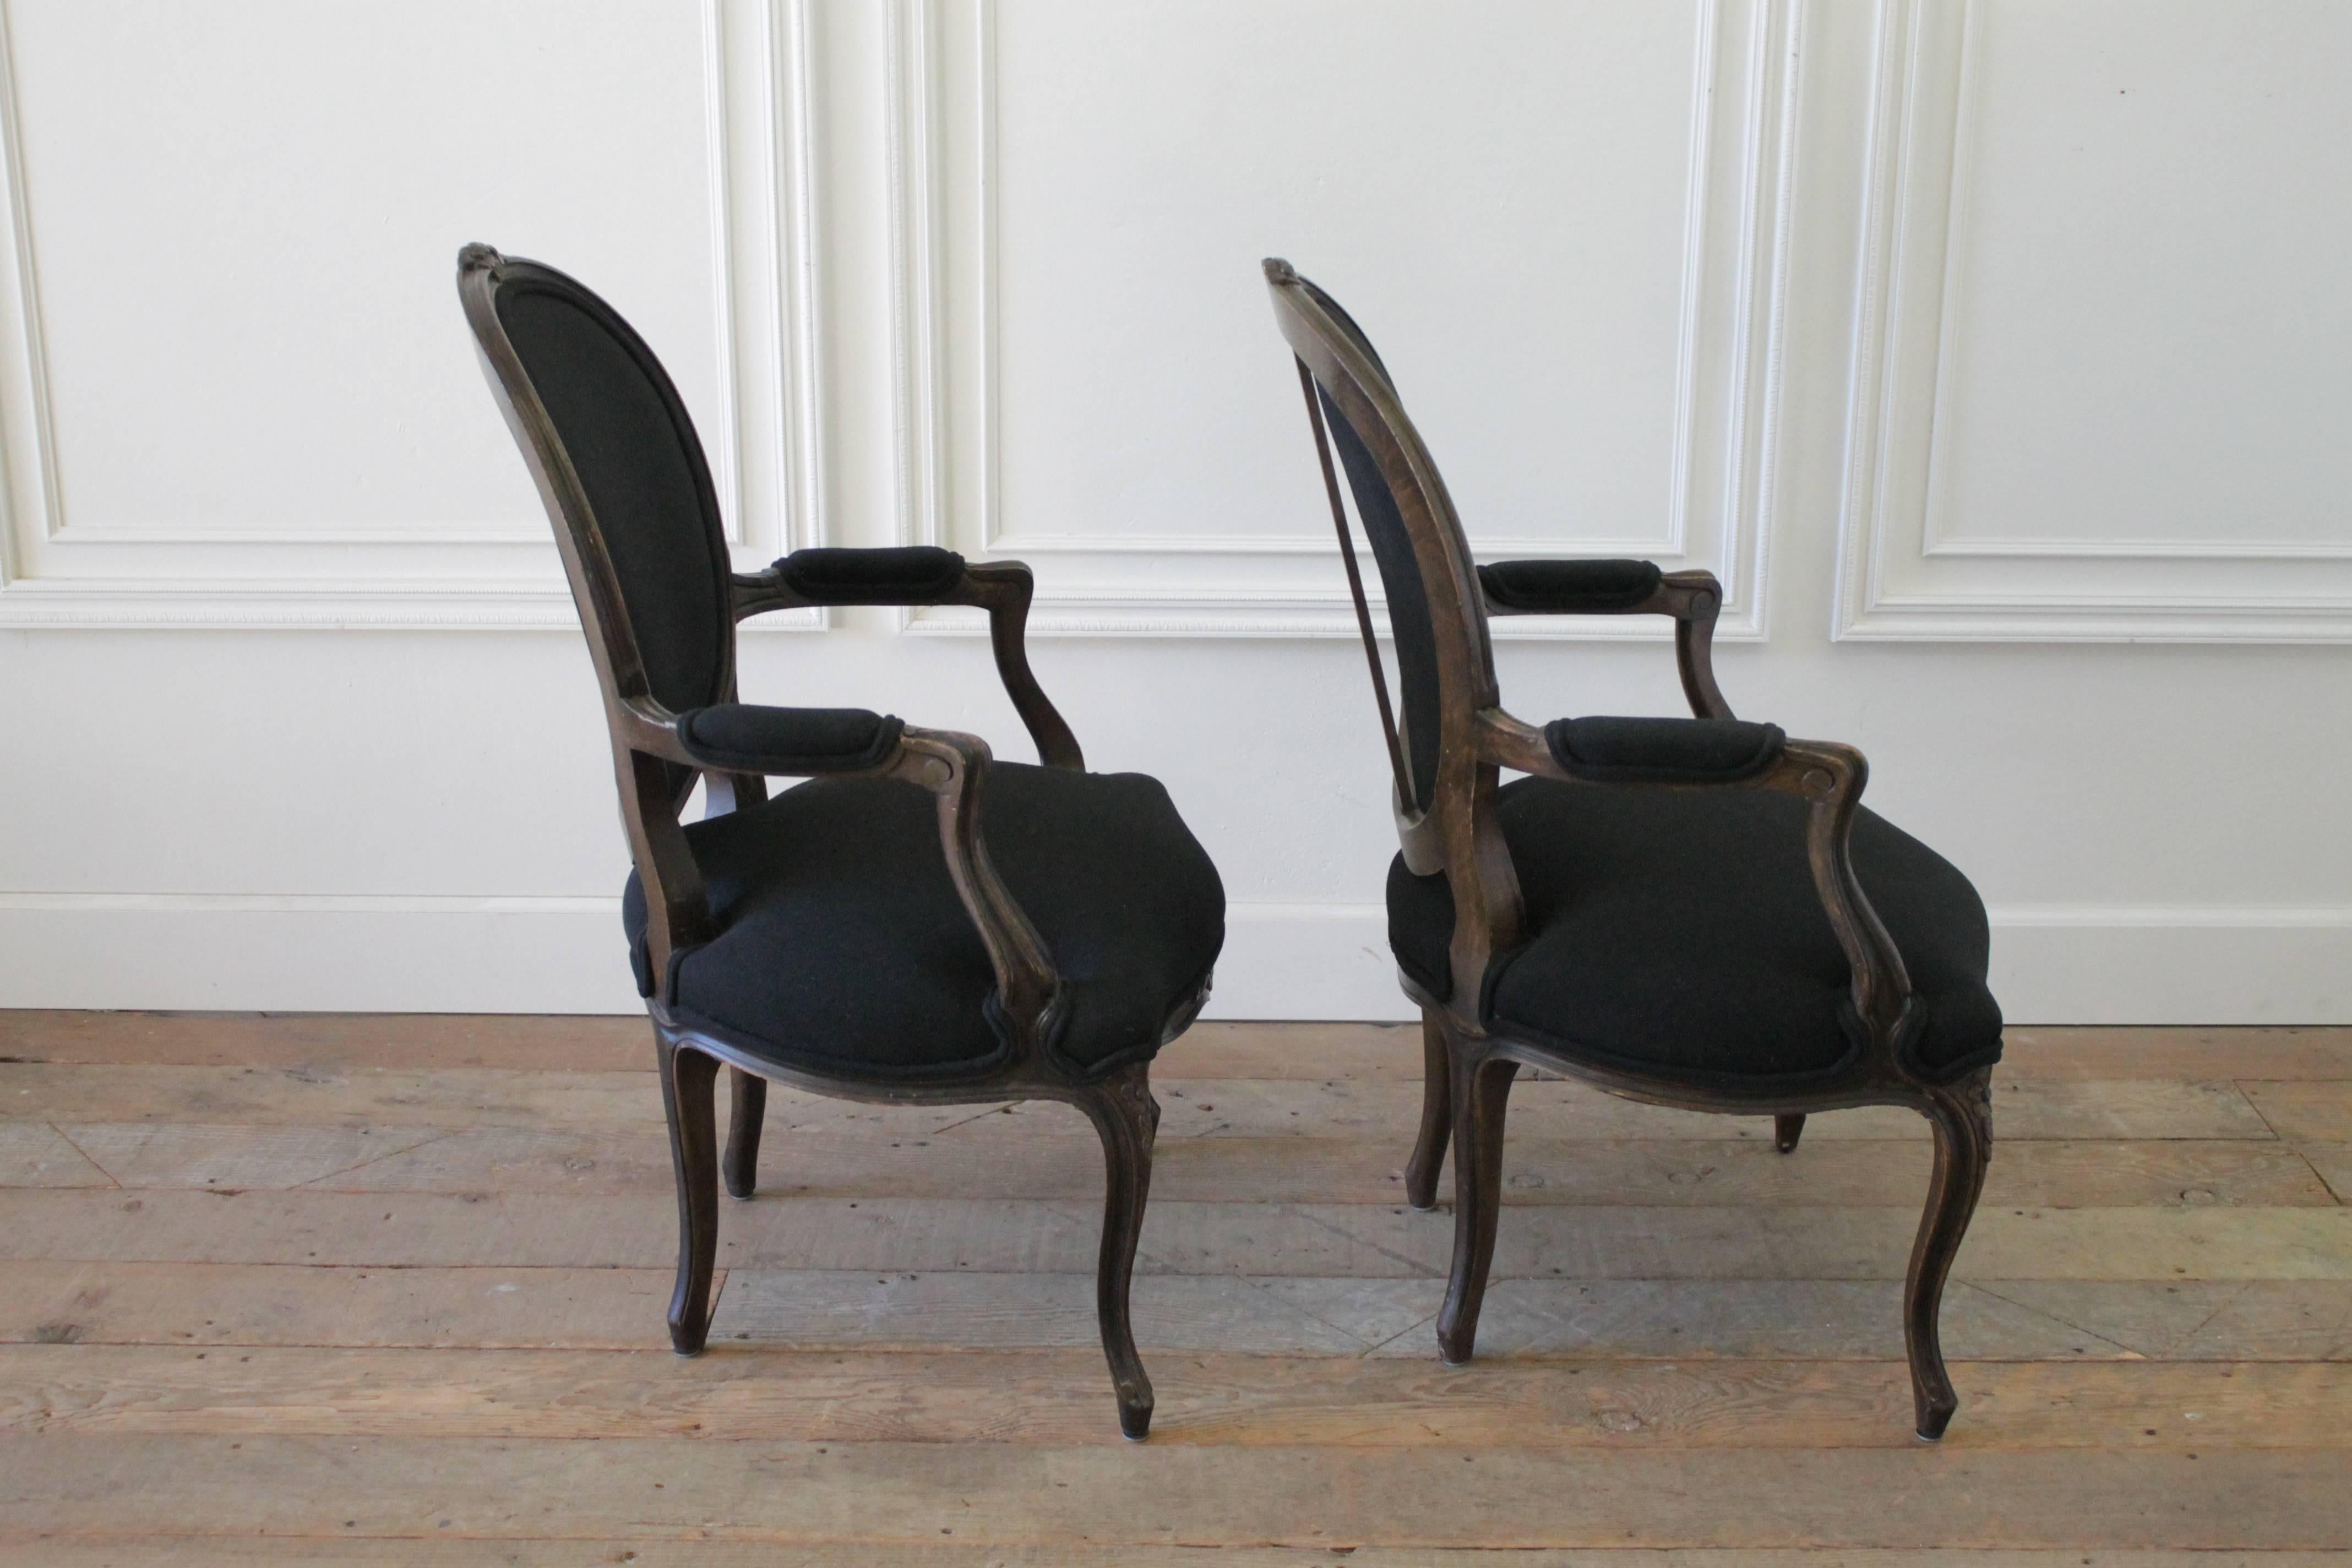 Pair of Walnut Fauteuils Louis XV Style Upholstered in Black Linen 1